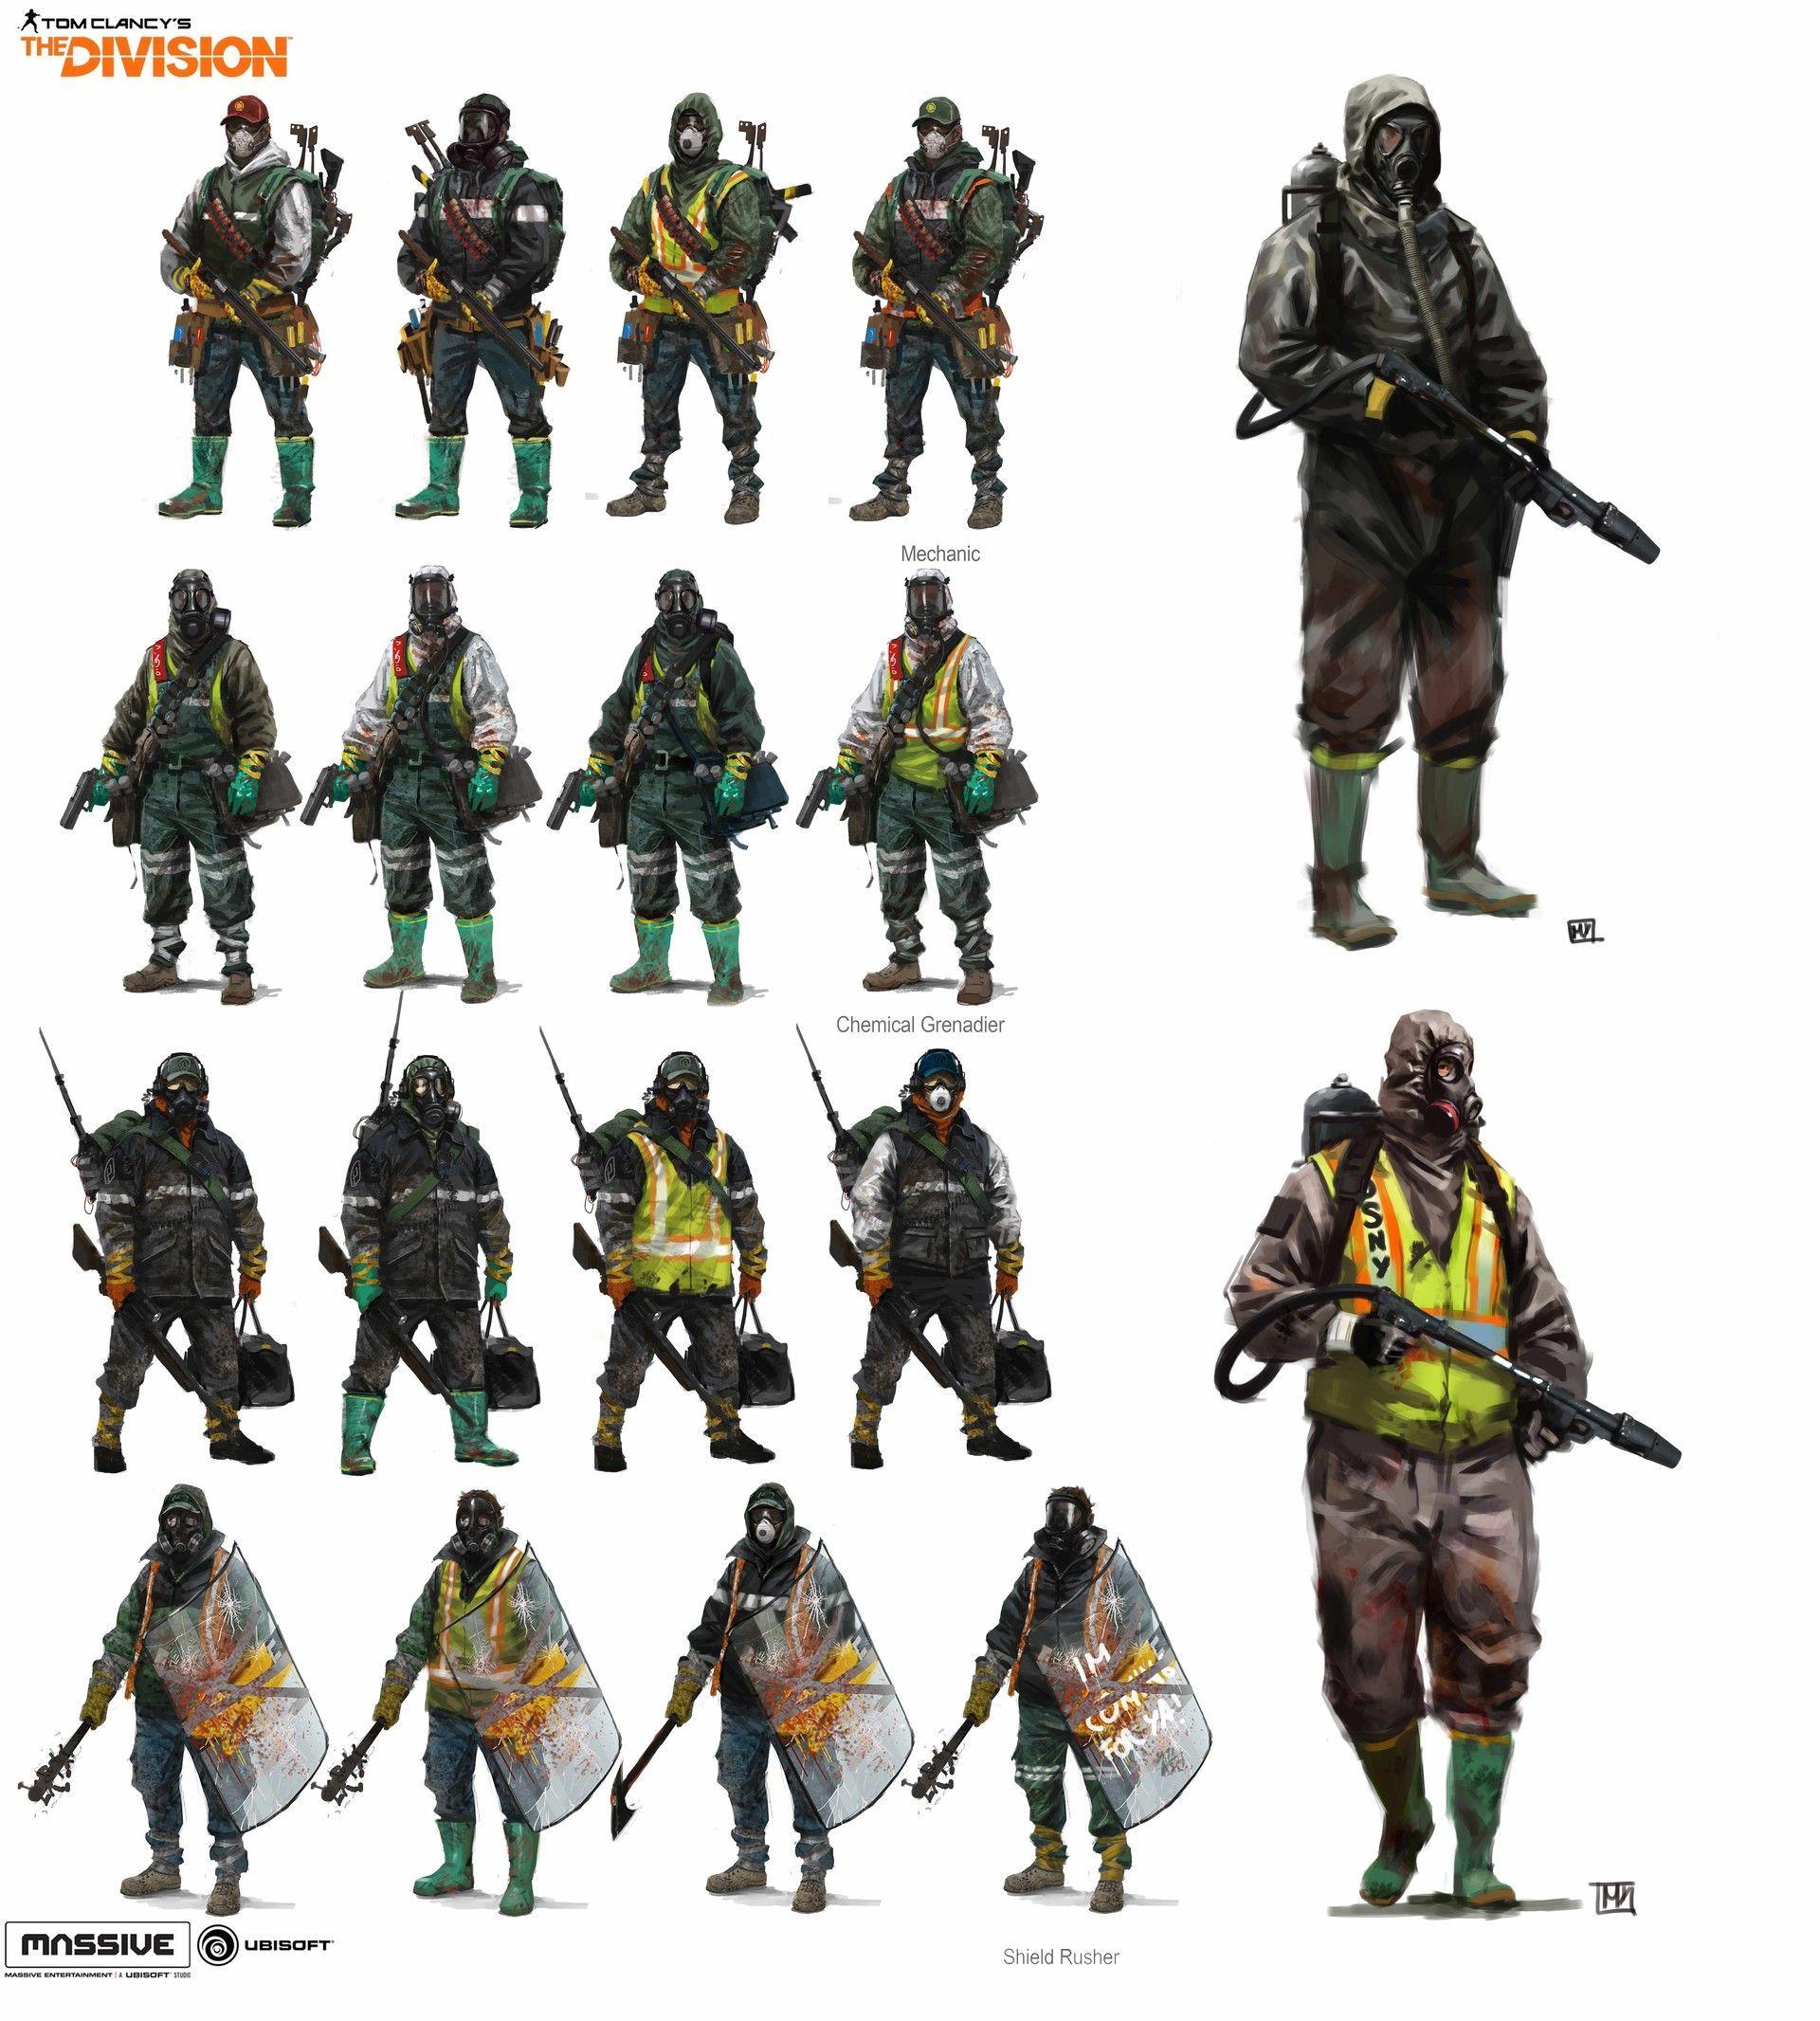 The Division Faction Logo - The Division: Enemy Factions Lineups concepts, Miguel